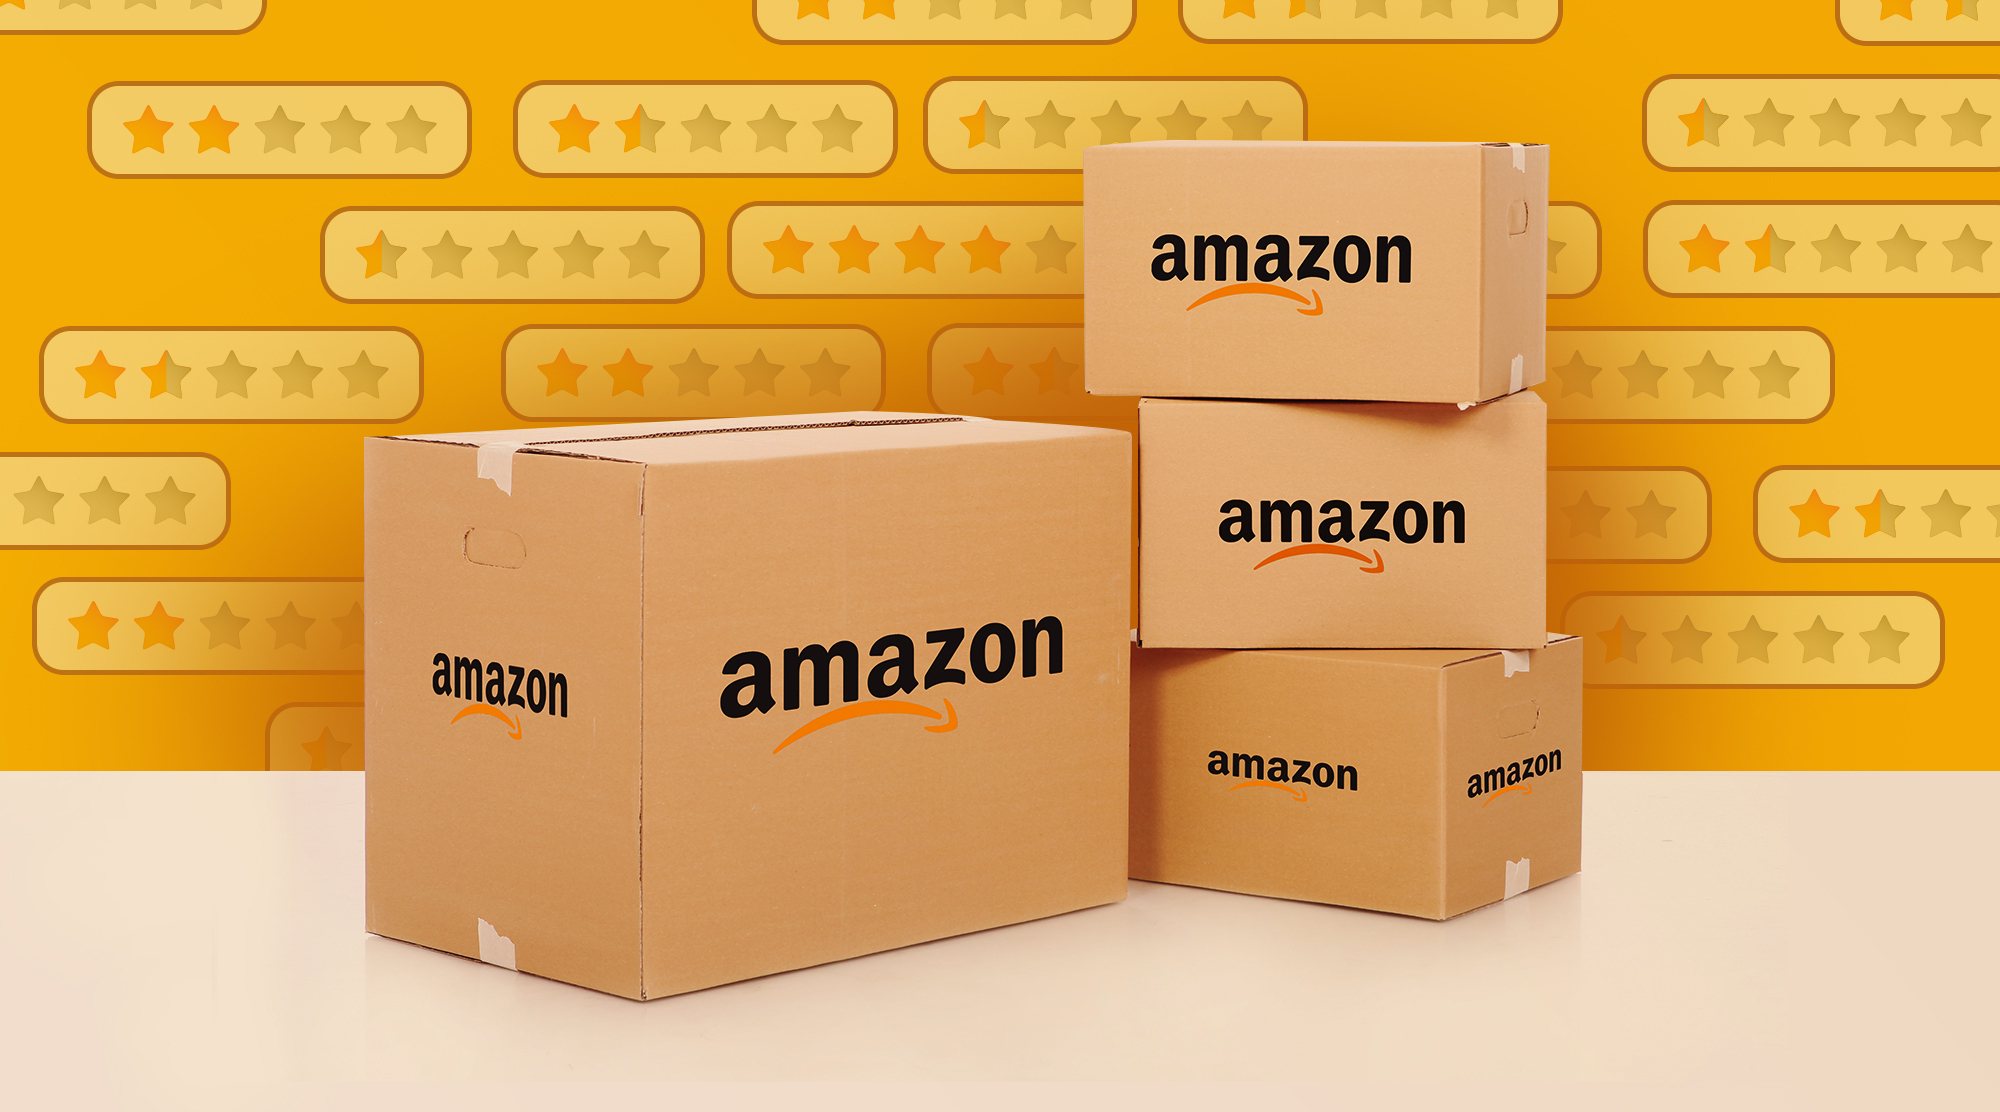 Image of several brown cardboard Amazon boxes with smiley face branding altered so the directive arrow points downward to suggest a sad face, against an orange background of star review symbols